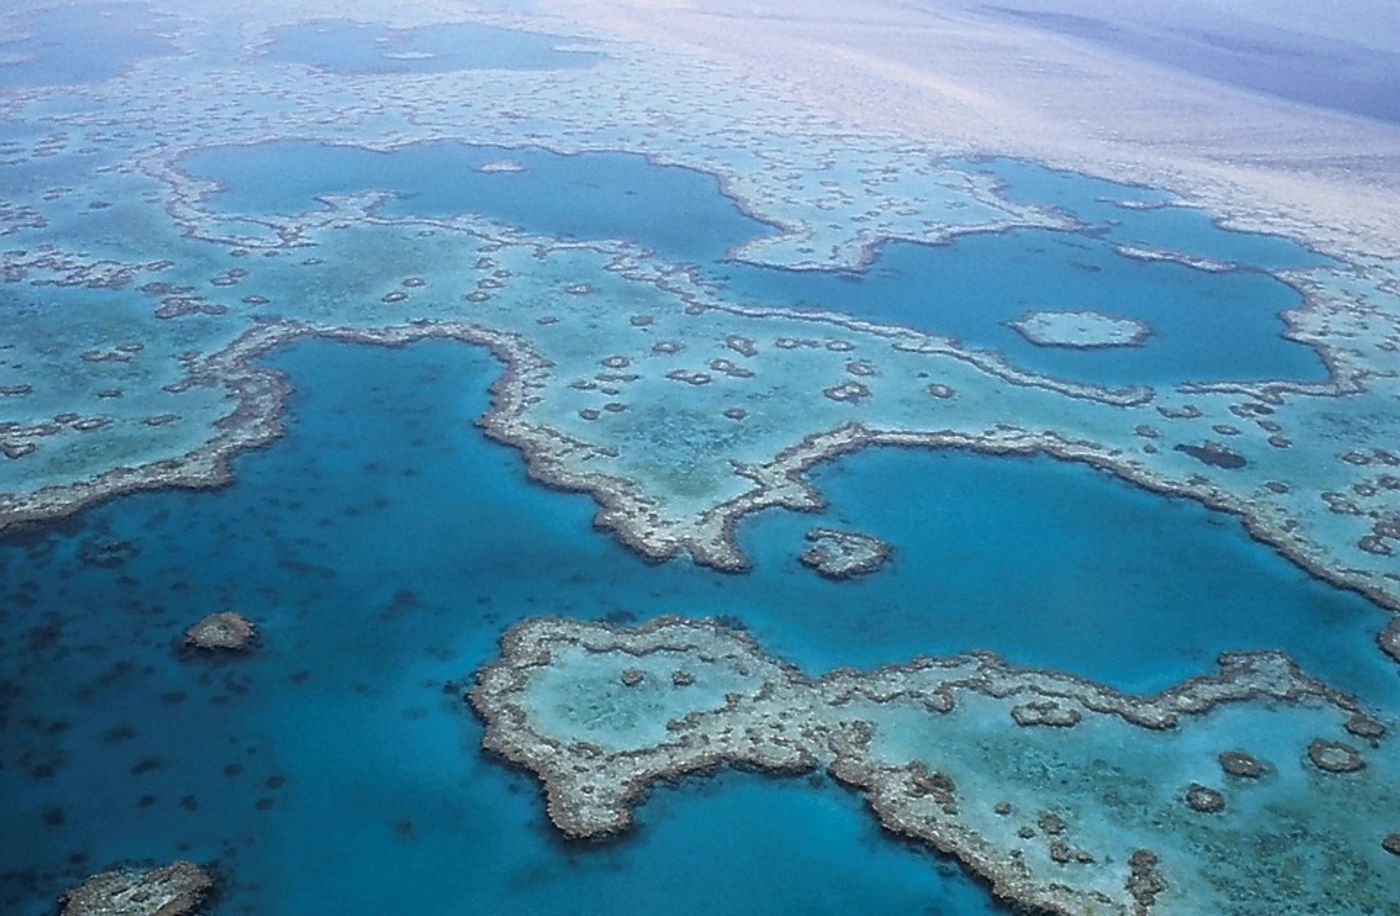 Scientists fear that the tipping point is near for the Great Barrier Reef. Photo: Pixabay